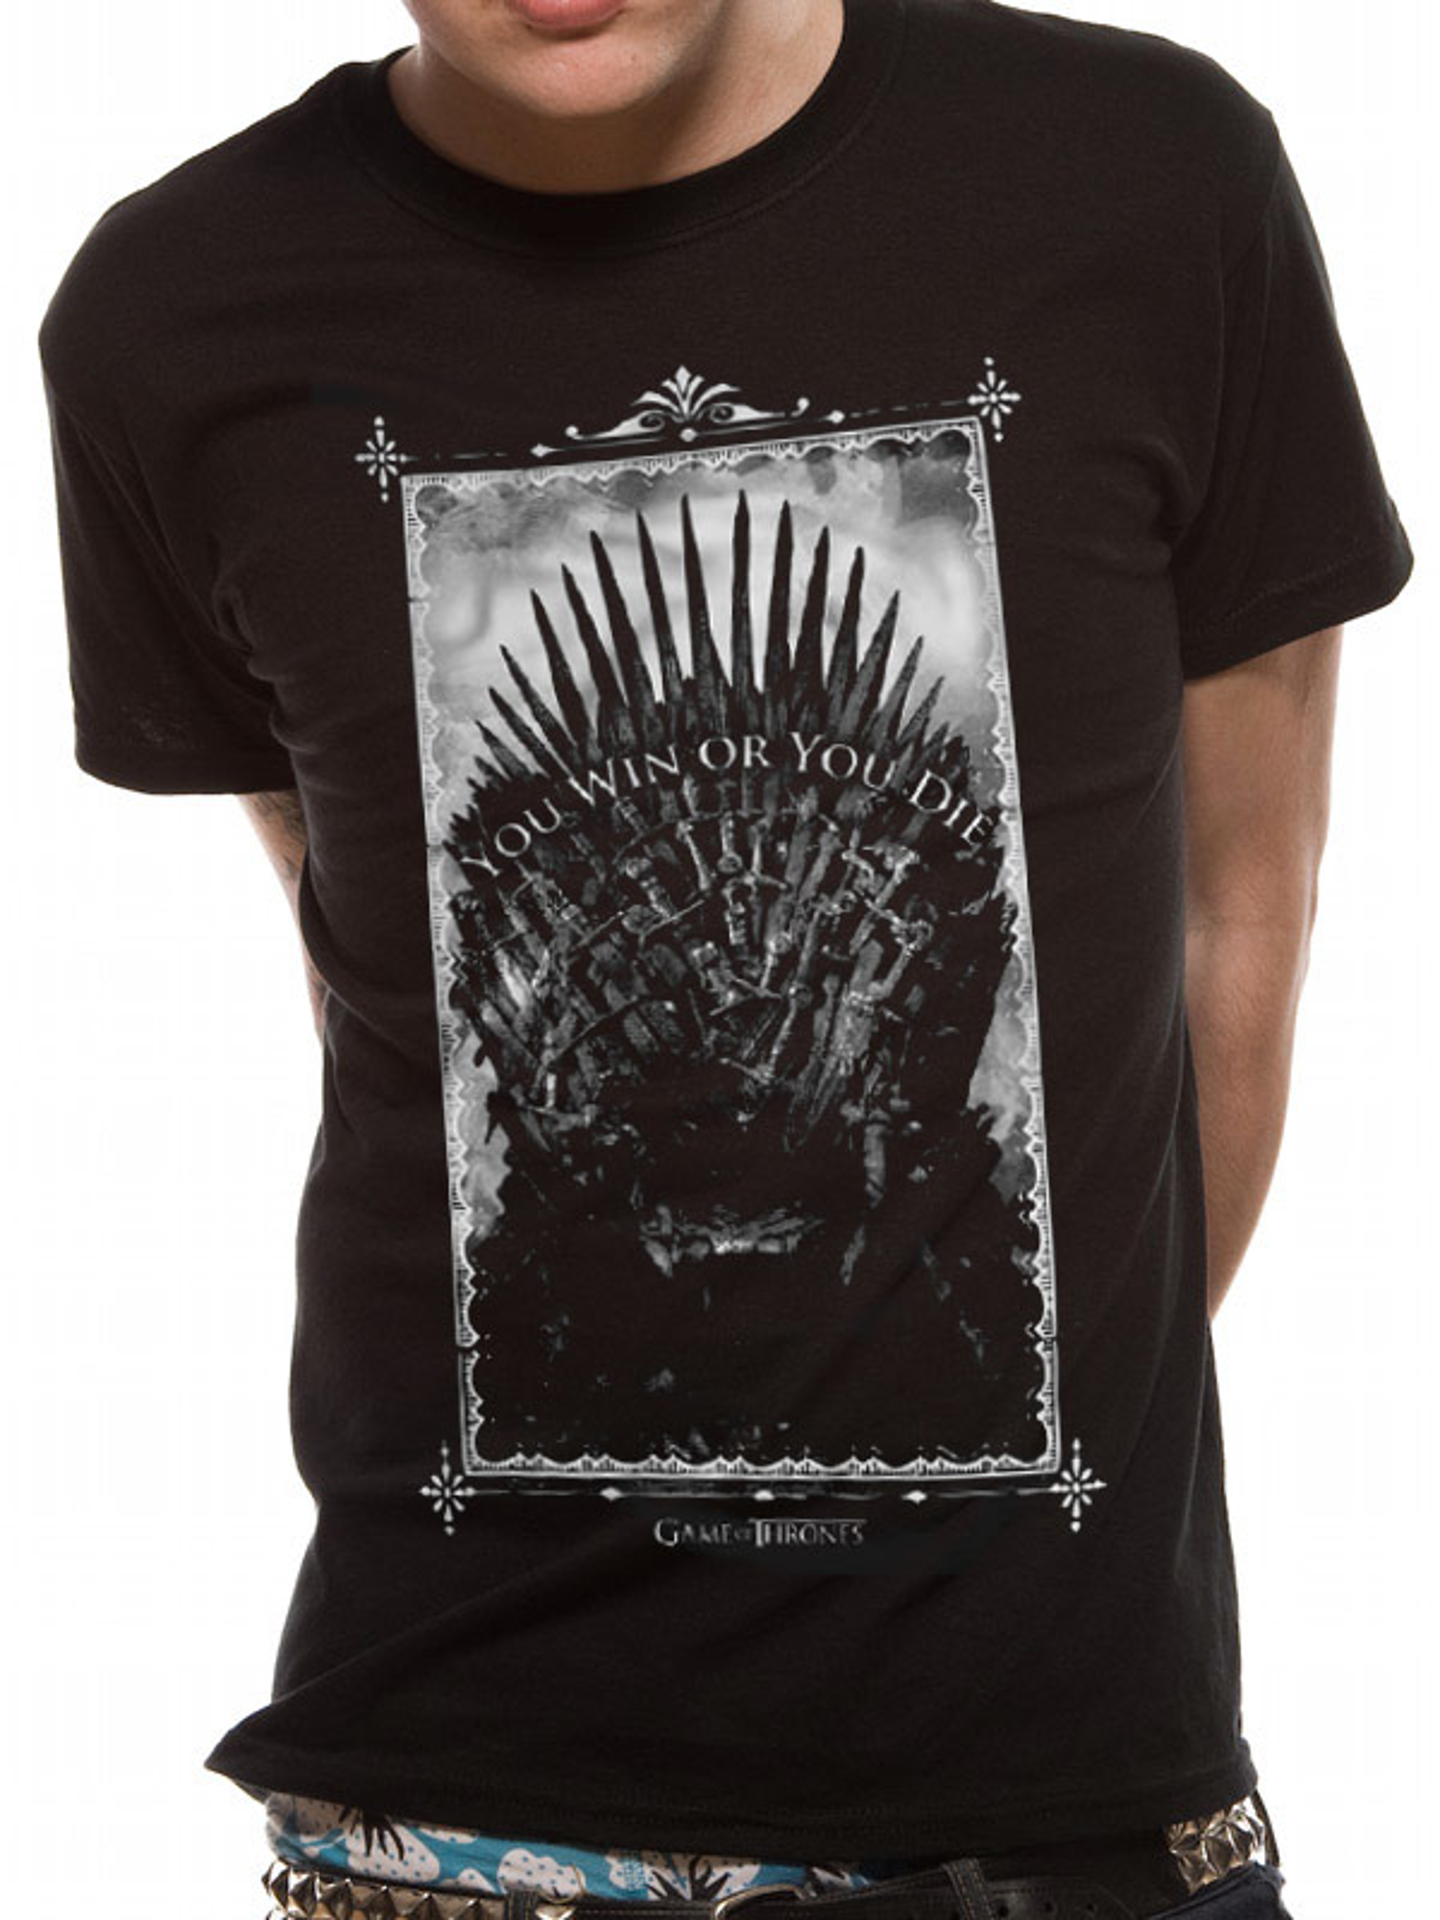 Game of Thrones - You Win or You Die T-Shirt - S